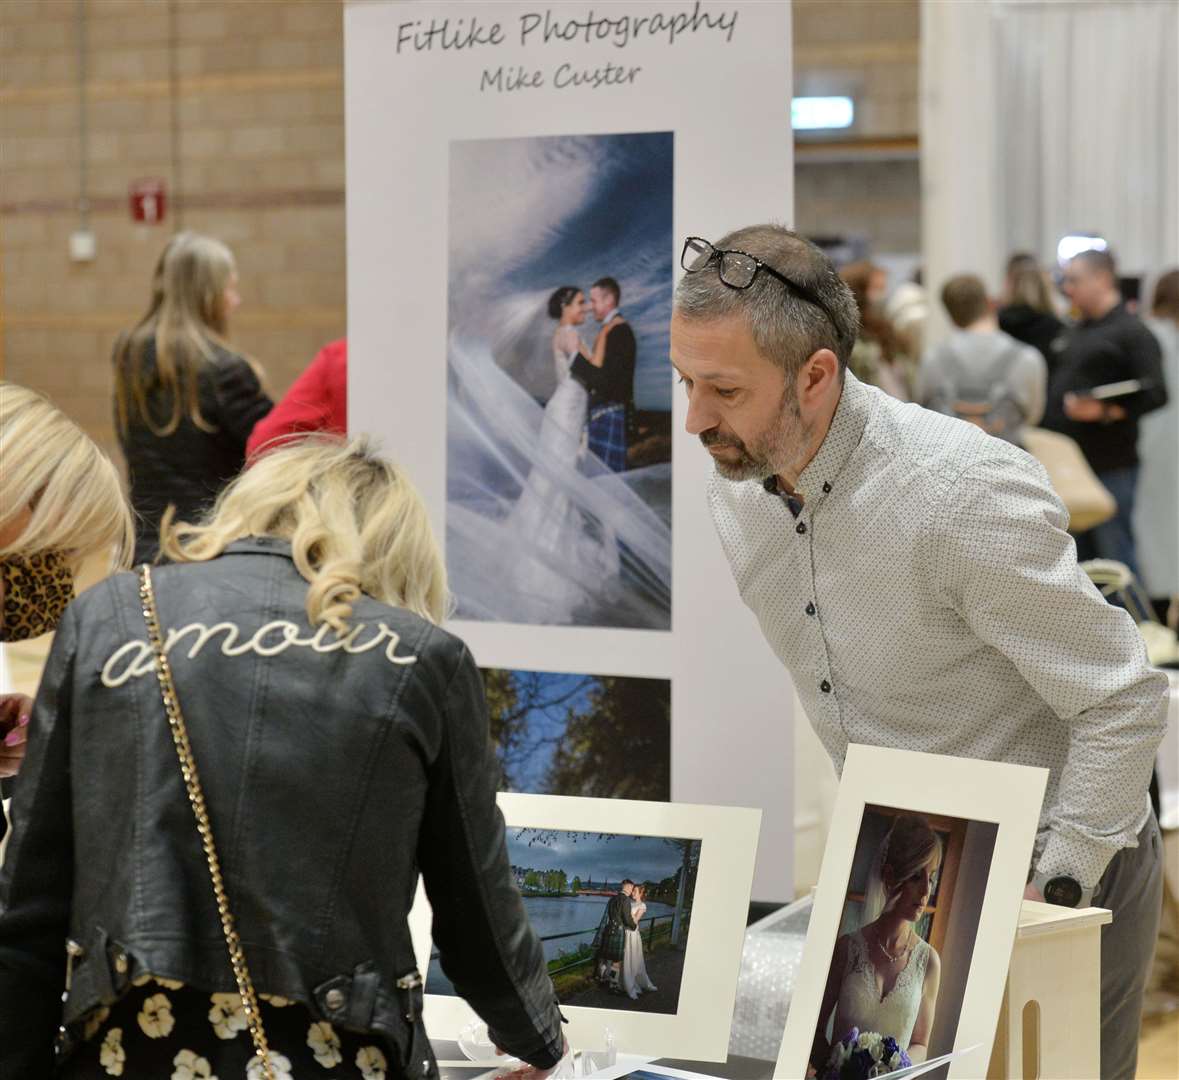 Fitlike Photography will be exhibiting at the wedding fair. Picture: Gary Anthony